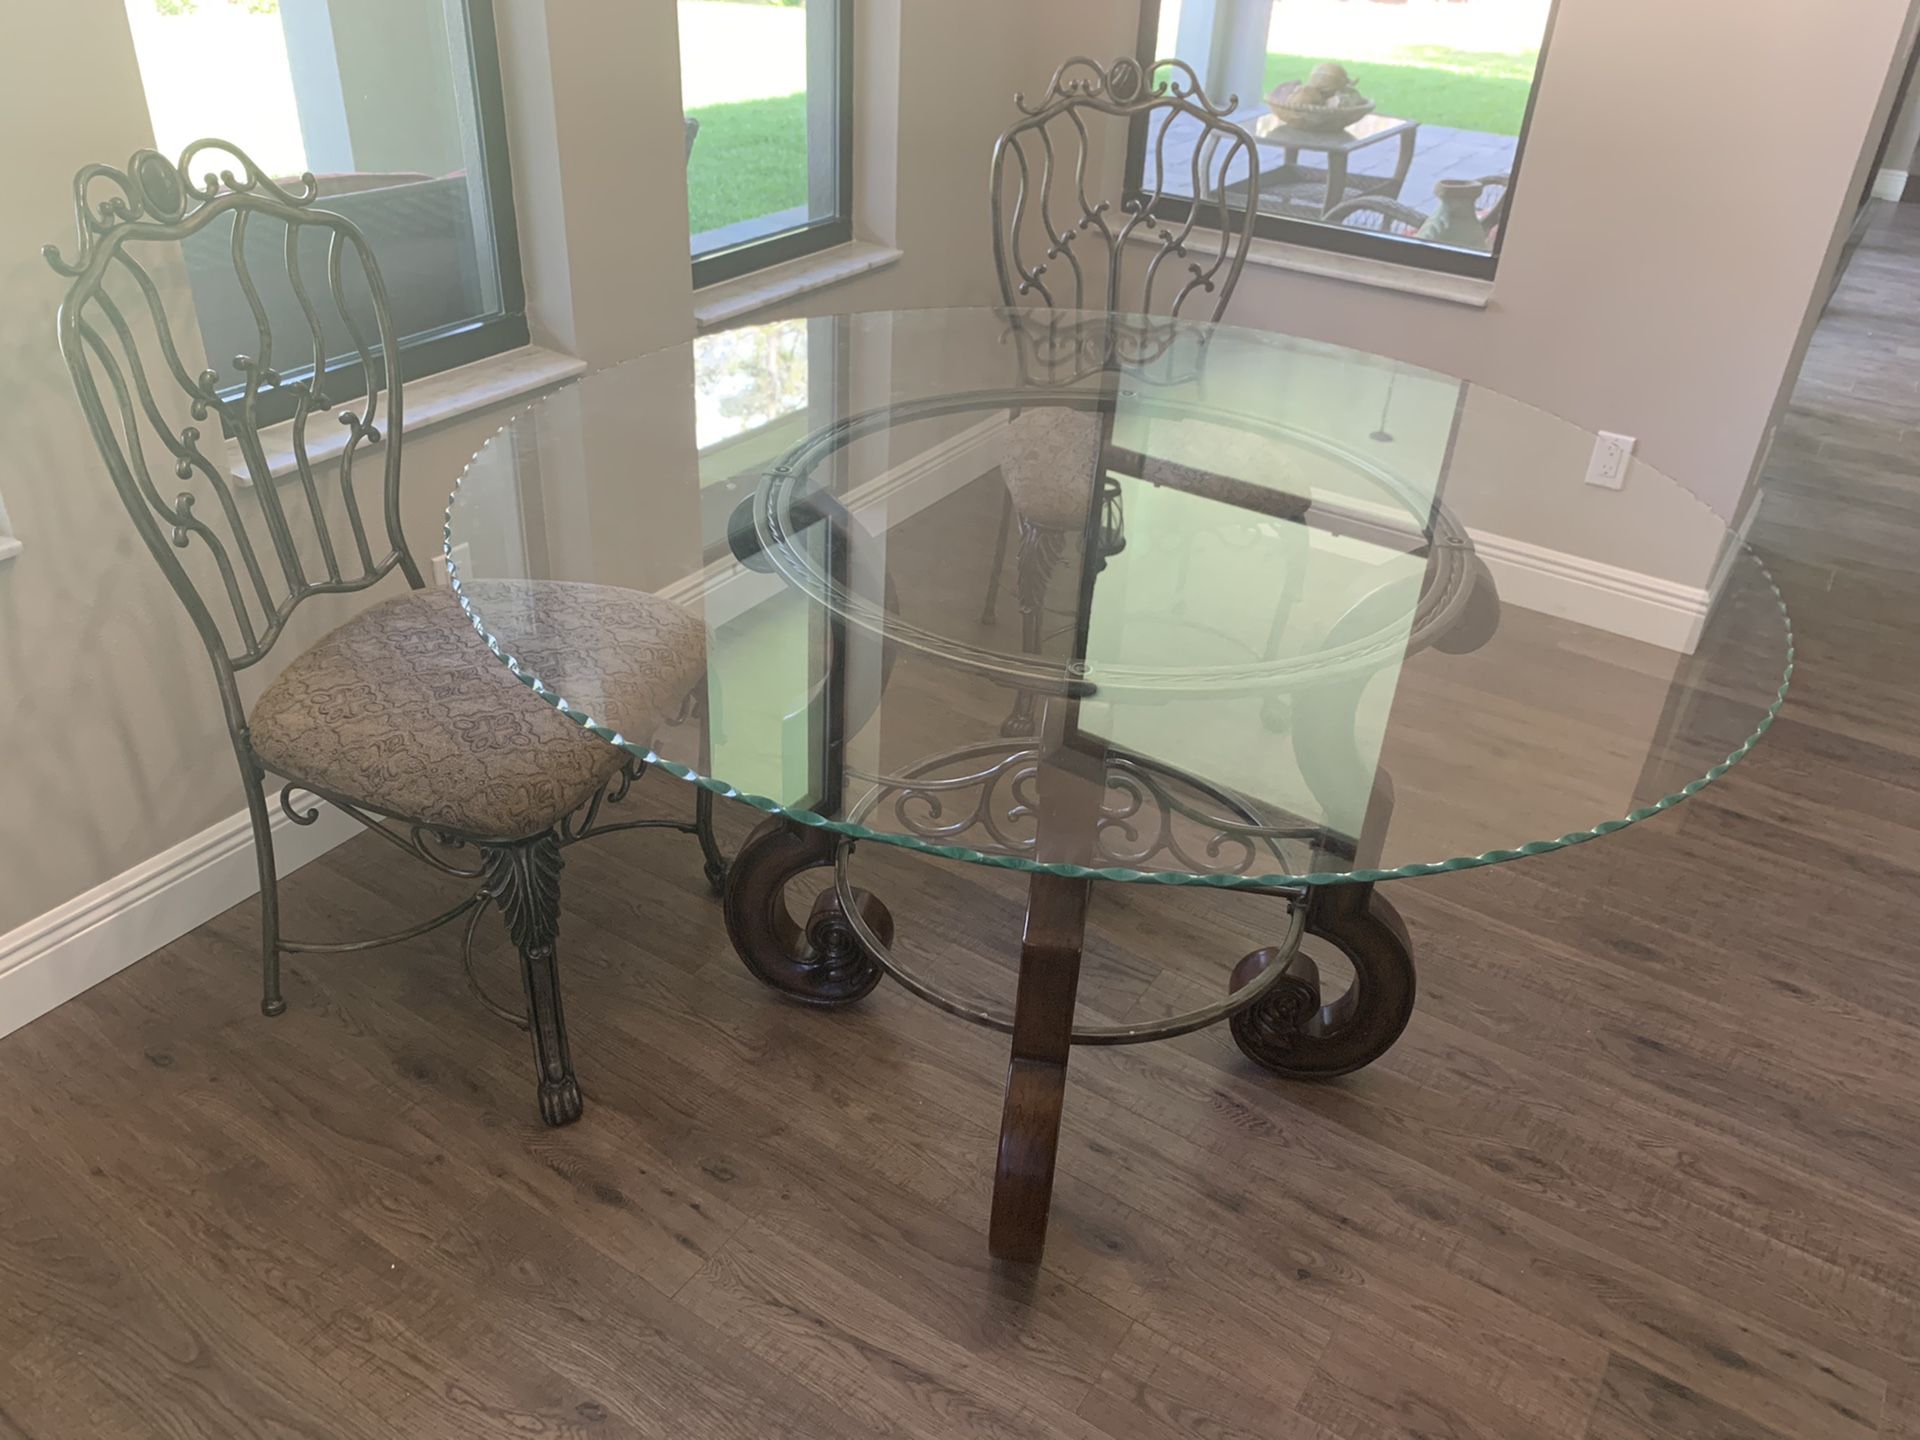 Kitchen table with 4 matching chairs